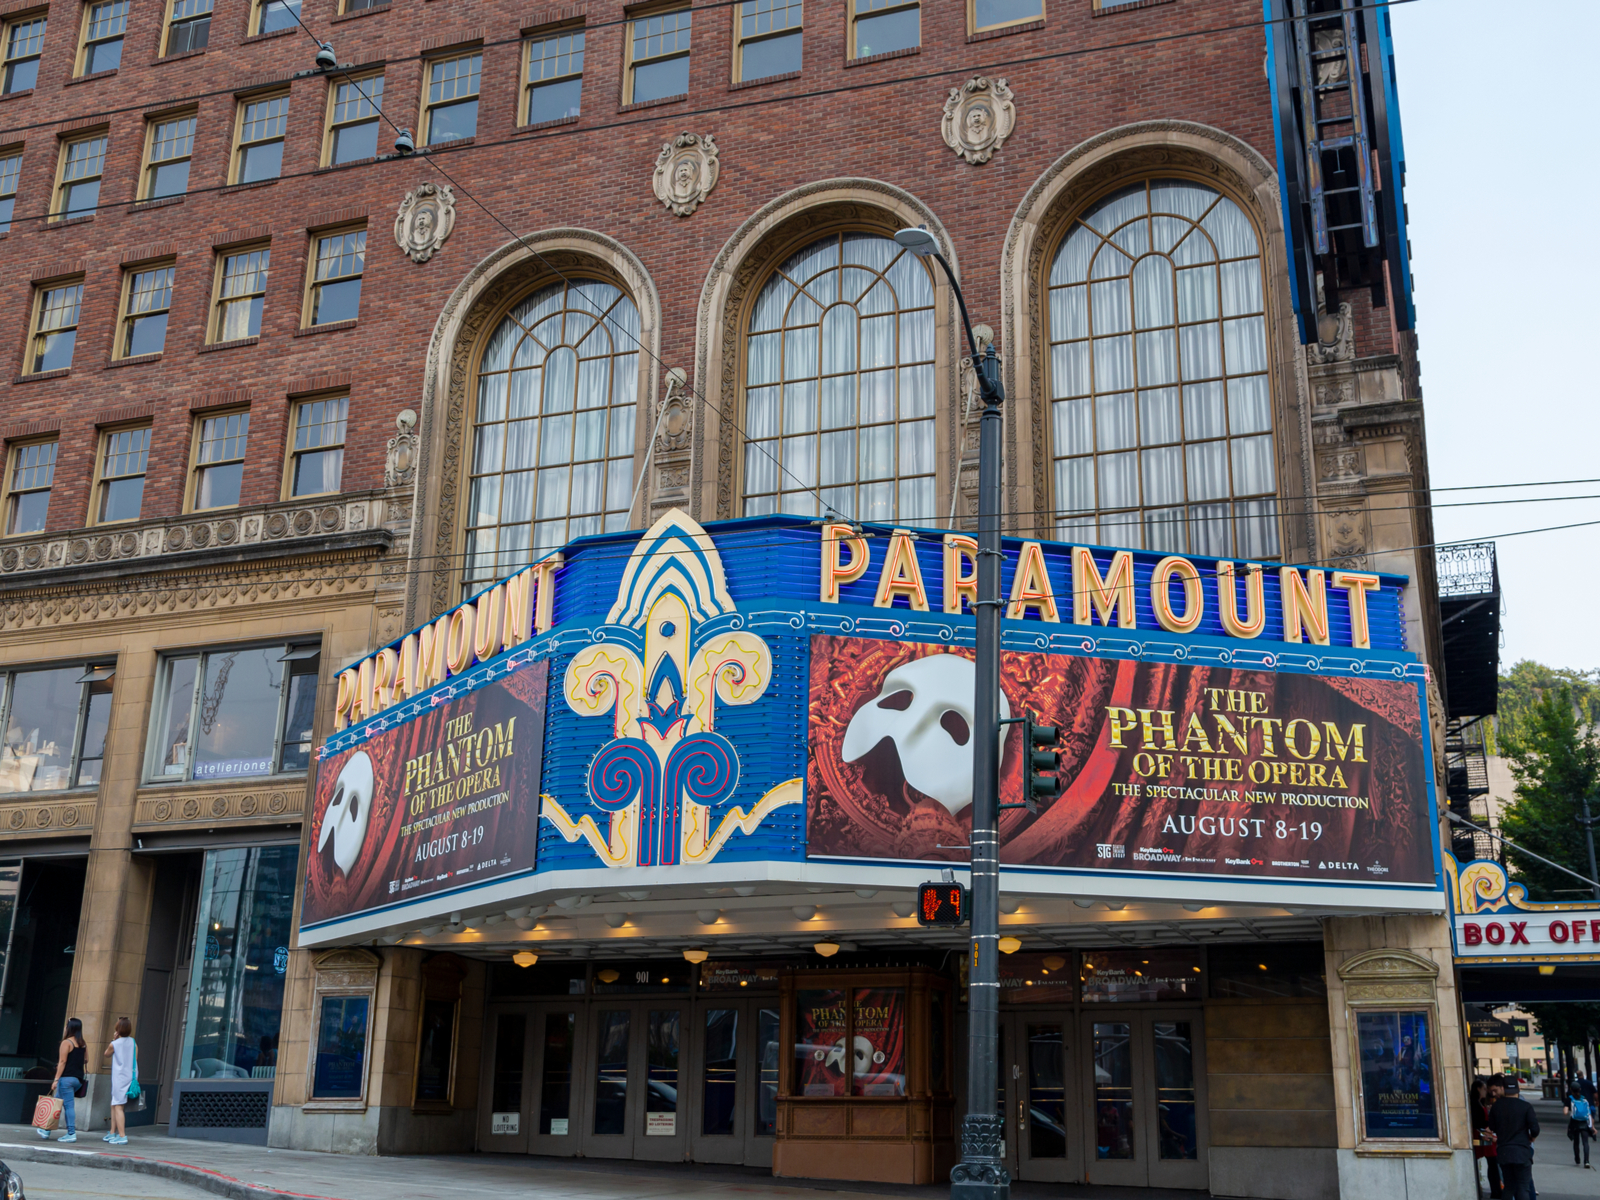 The Paramount Theatre, one of the best things to do in Seattle, as viewed from the street